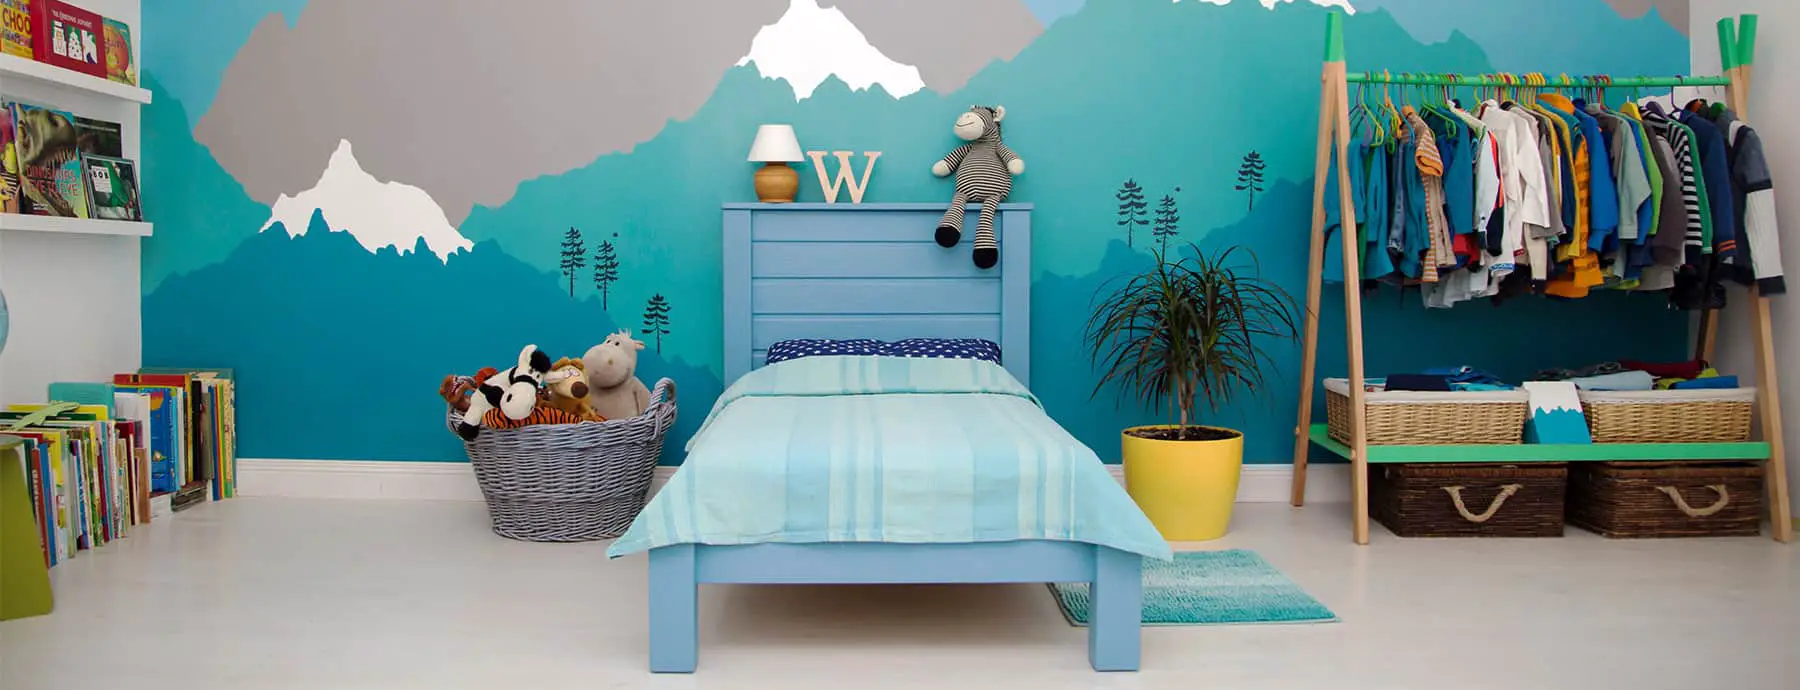 Diy Decorating Ideas For Your Kids